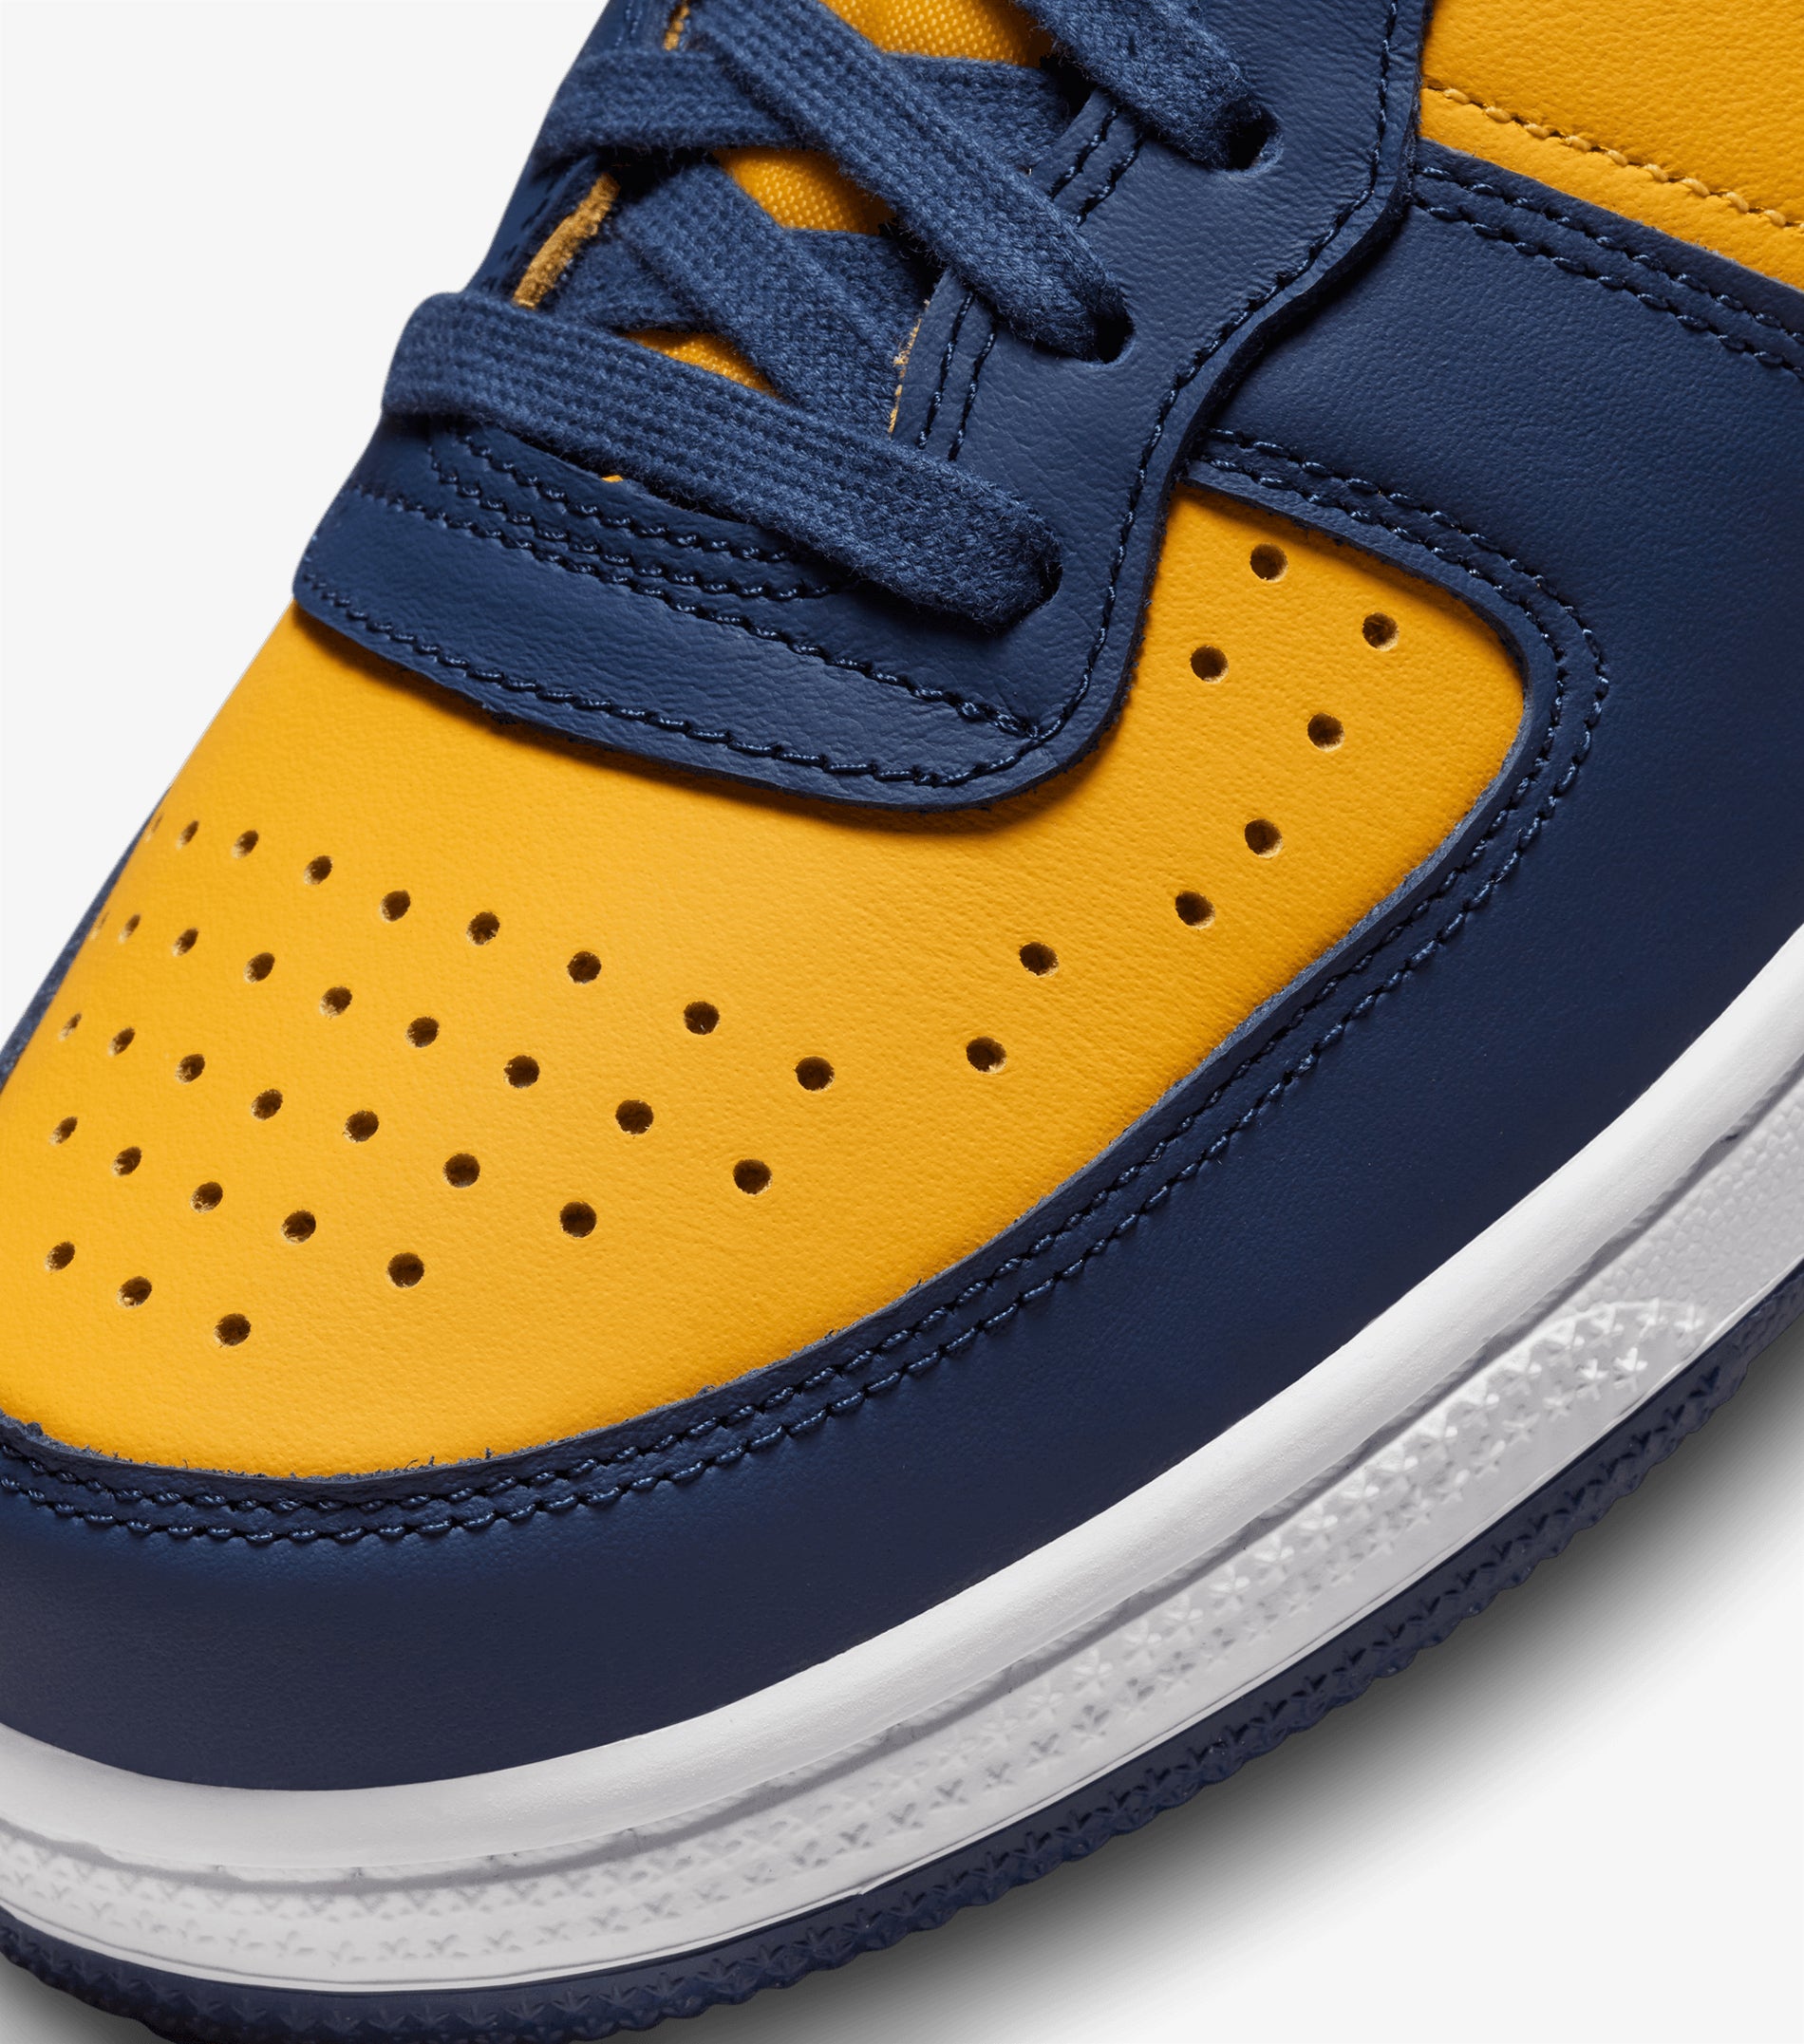 Terminator Low OG University Gold/Navy – Bows and Arrows